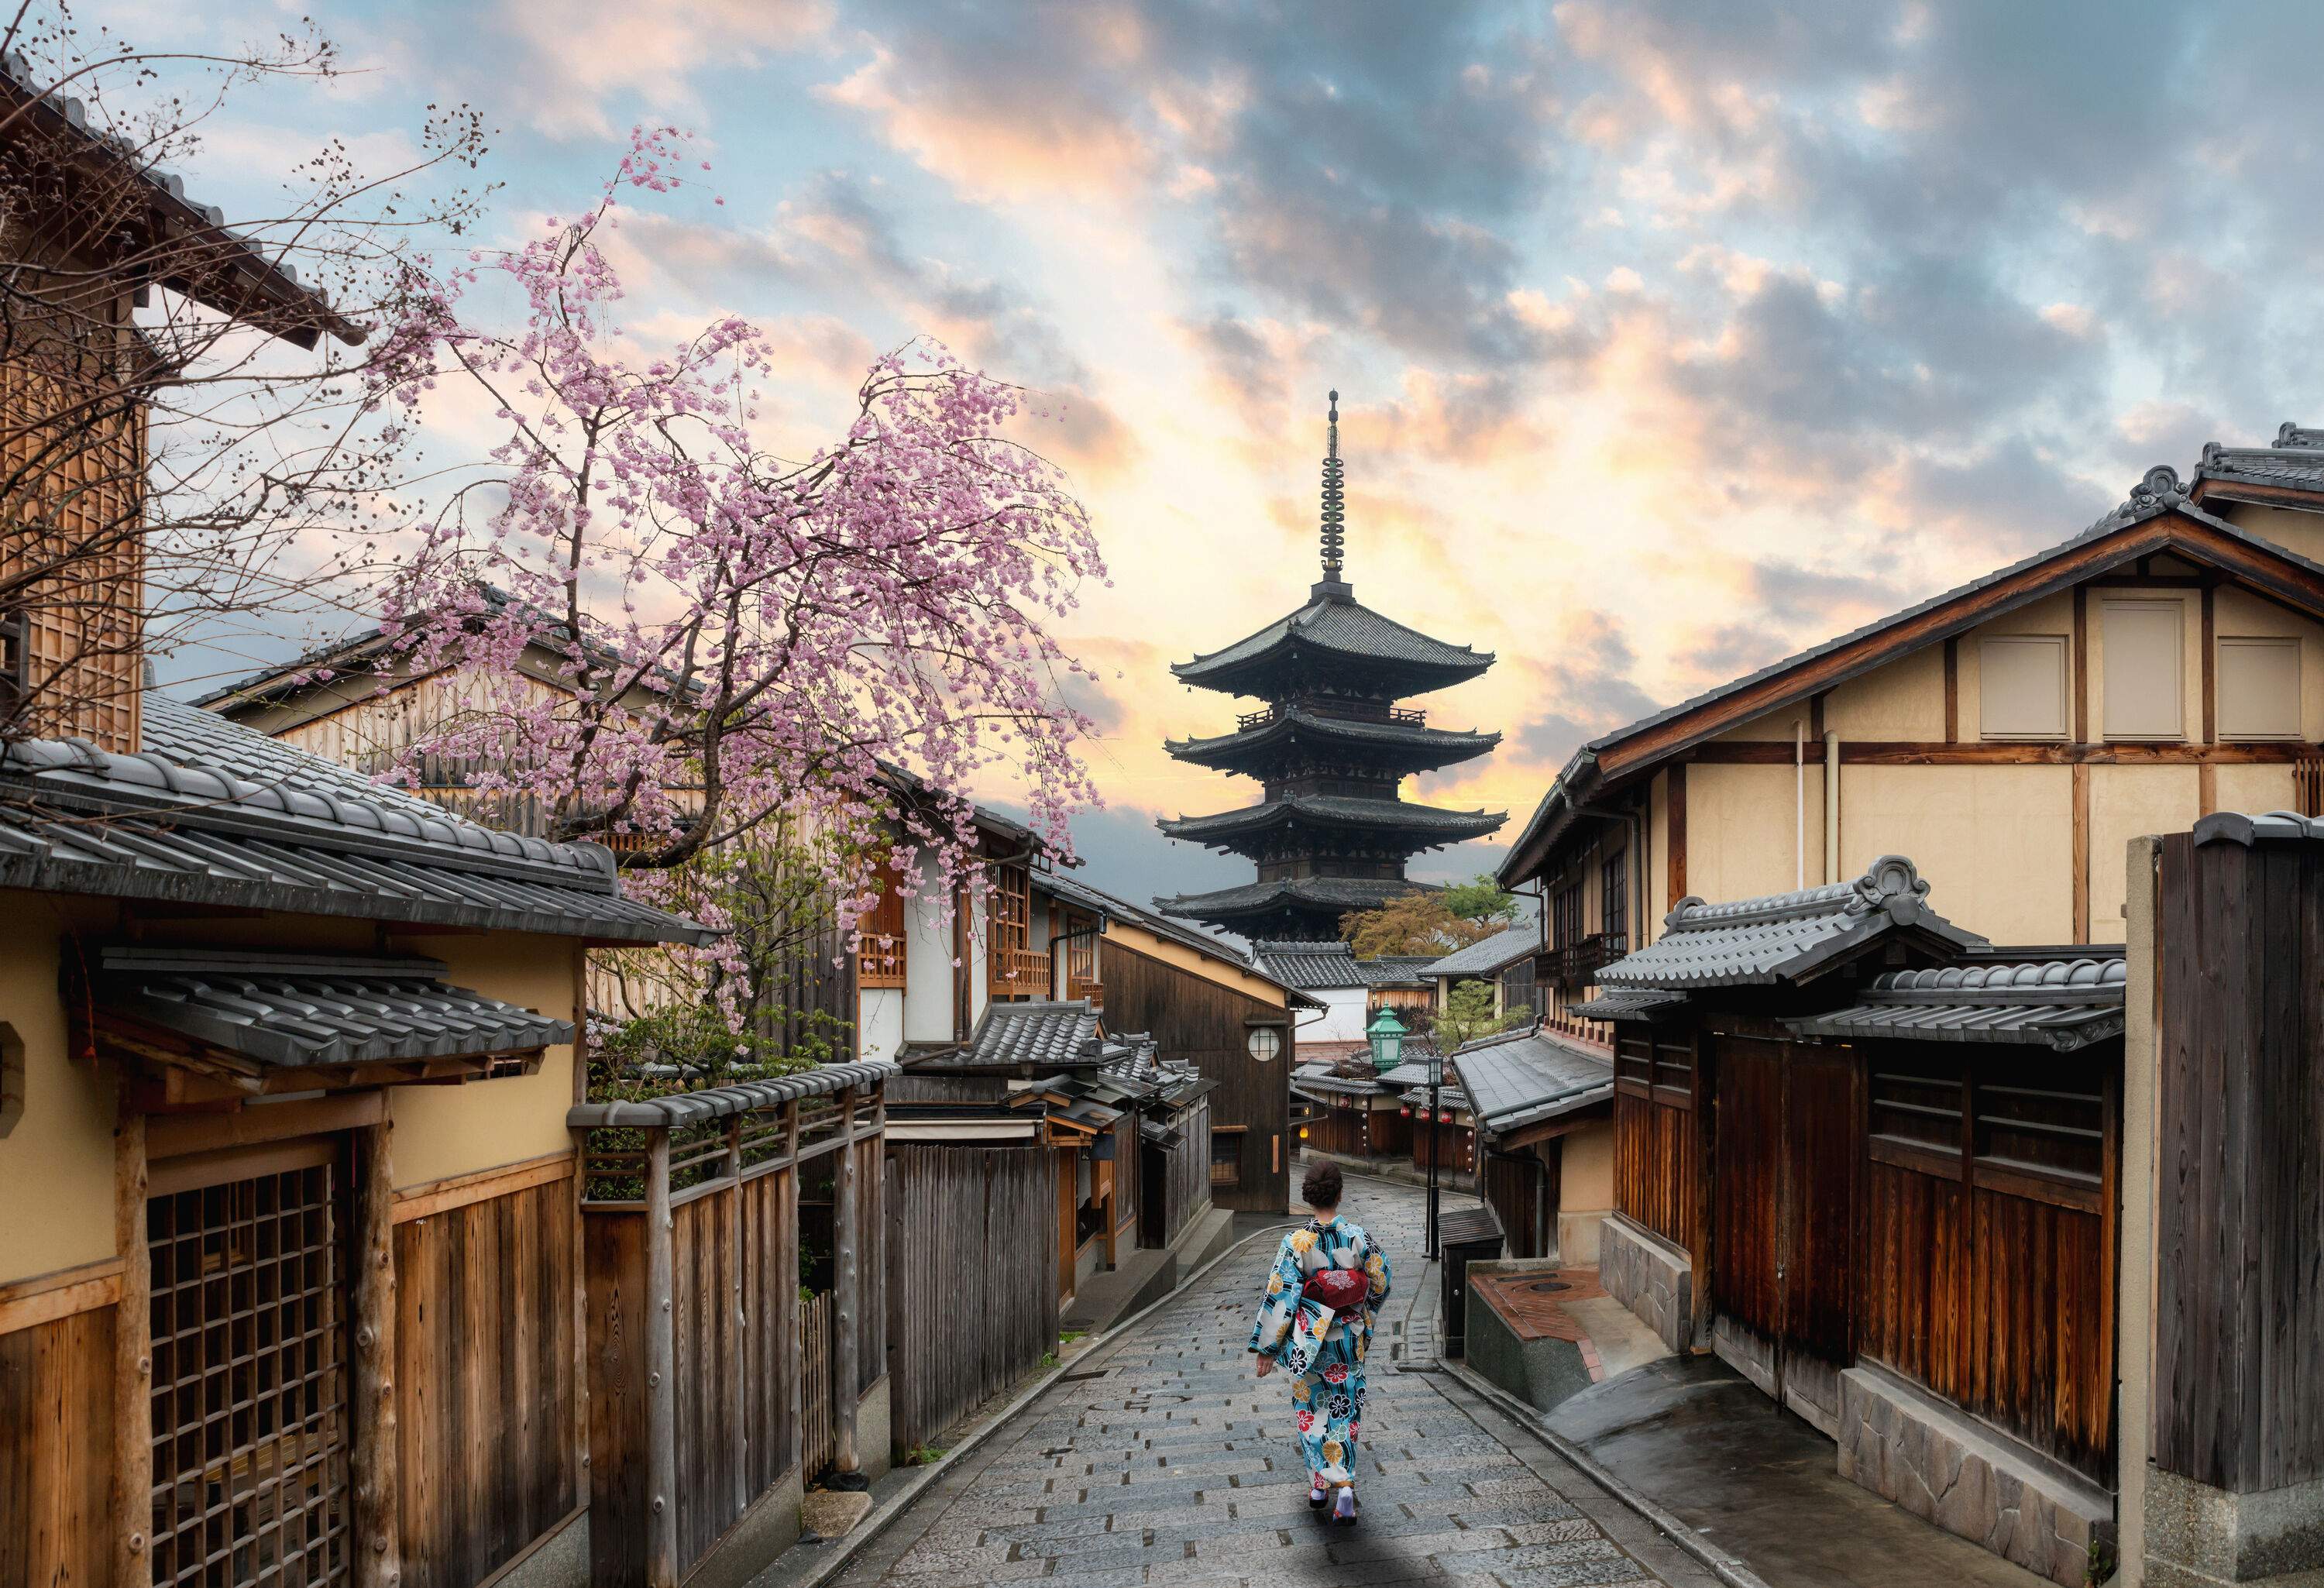 A woman donning a colourful kimono walking down a paved alley with a pagoda in the backdrop.